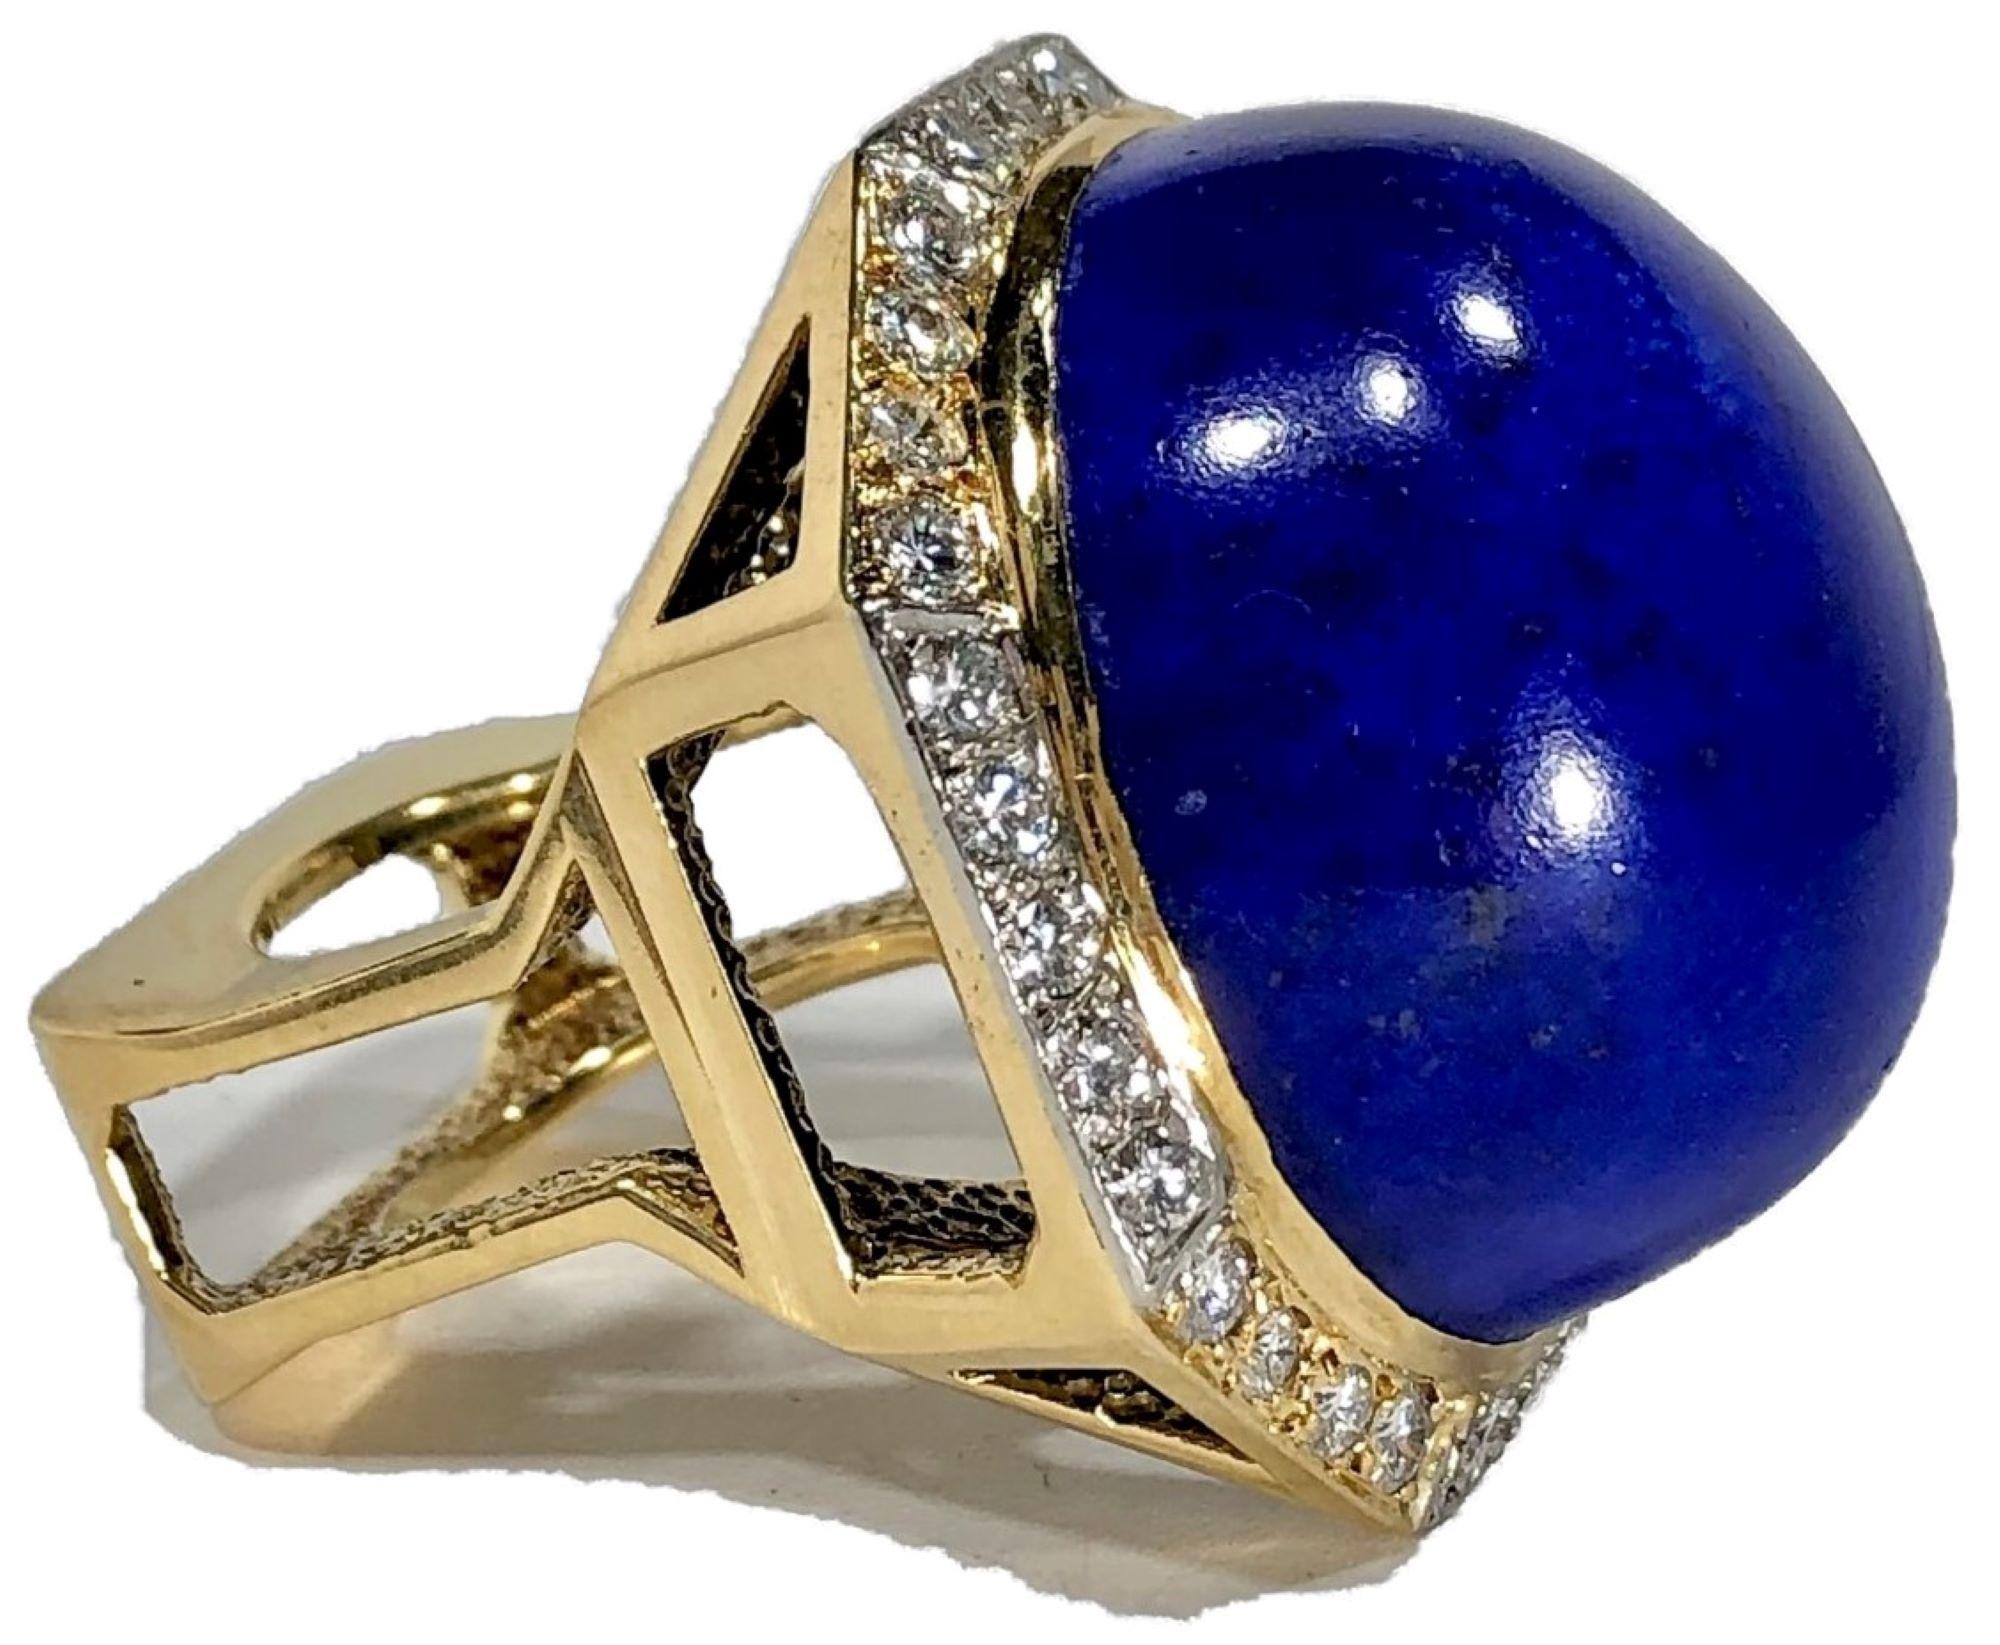 This 1970's cocktail ring can best be described as massive, impressive and iconic. Crafted from 18k yellow gold with all diamonds set in 18k white gold plates, It measures 
1  5/16 inches long by 1 3/16 inches wide. The enormous rich blue Lapis